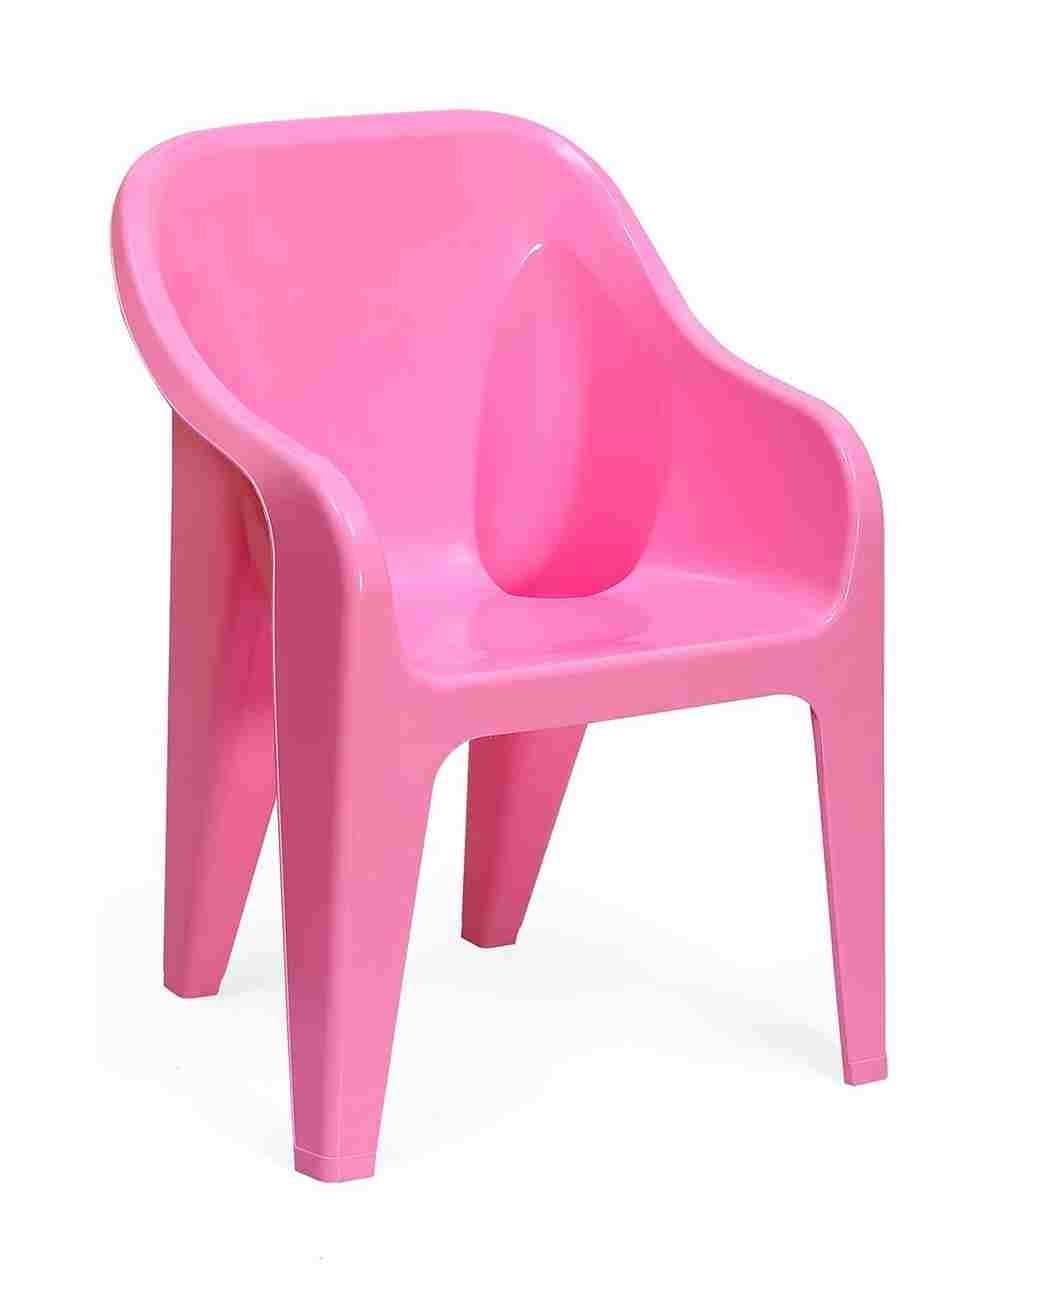 kids chair pink color study, play side view